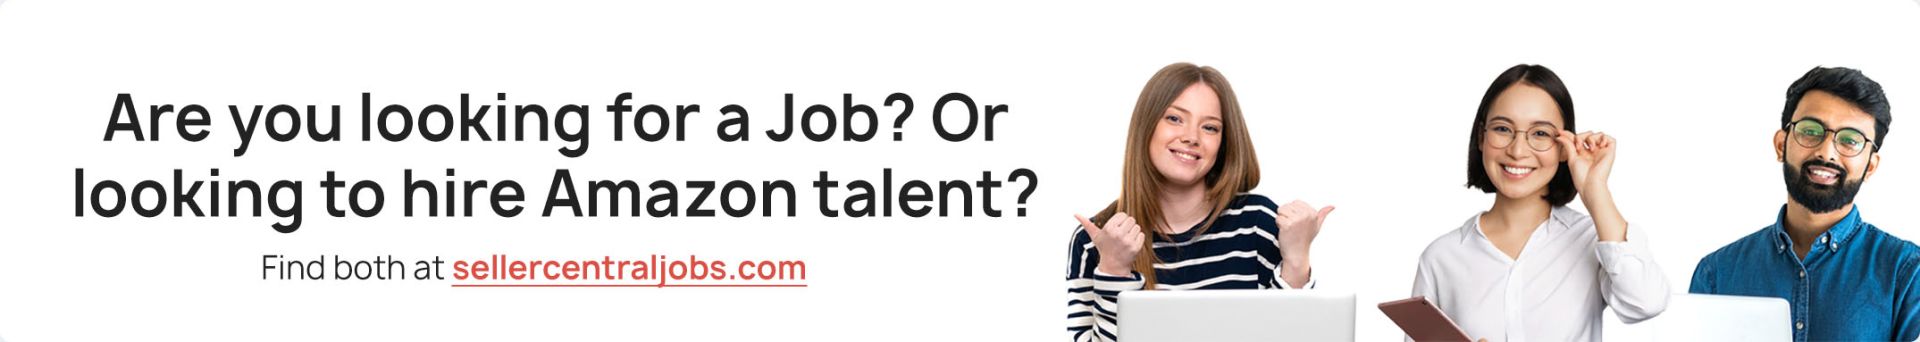 Find a job or look for Amazon talent at Seller Central Jobs